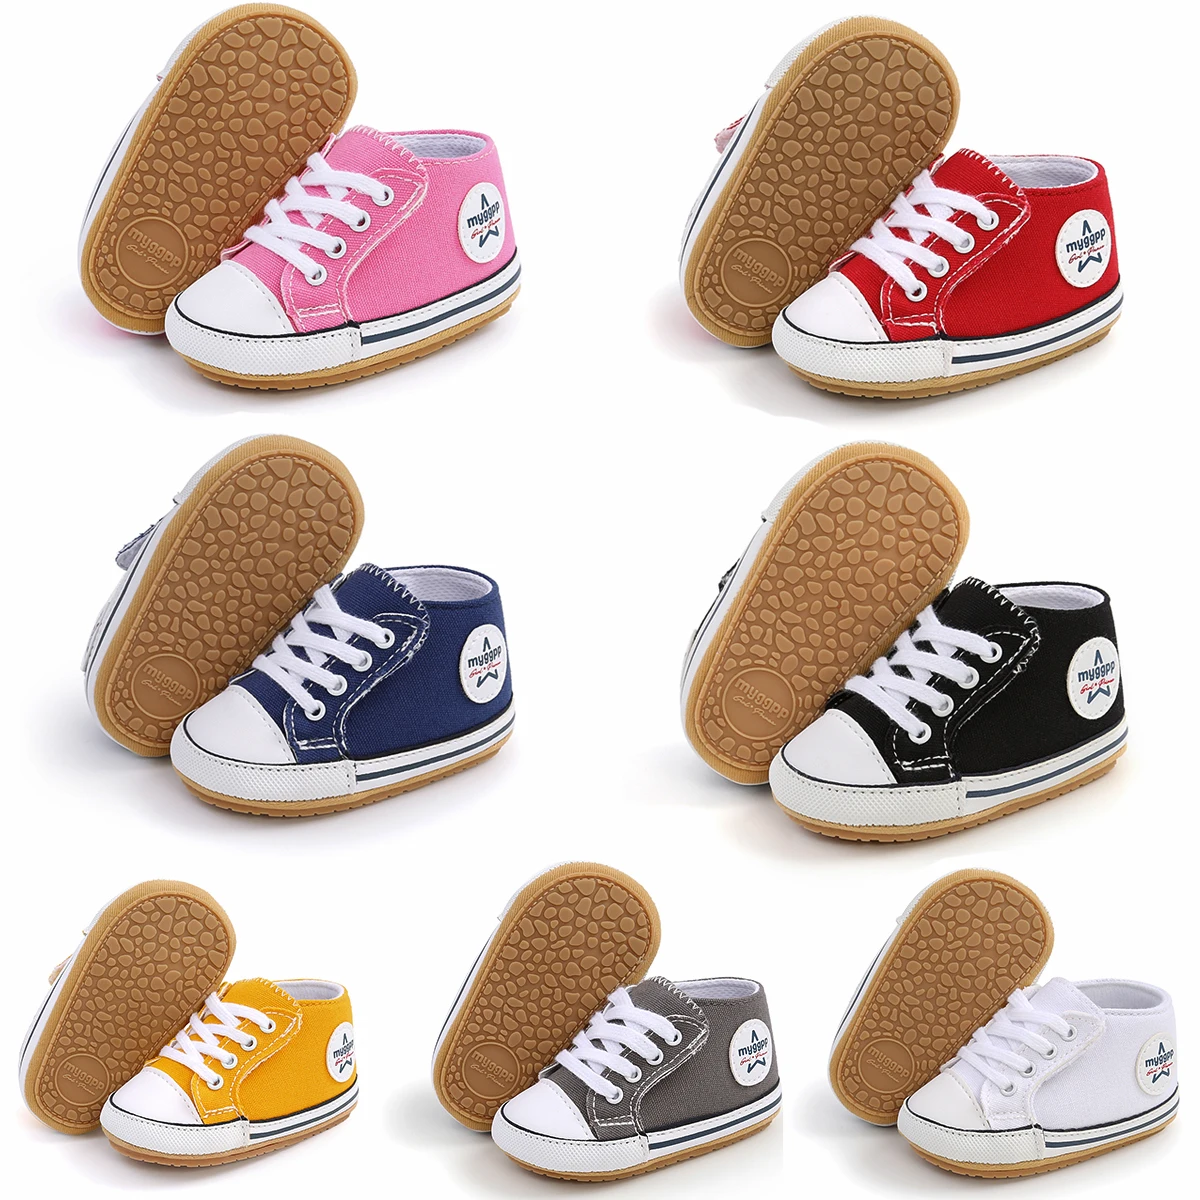 2022 New Classic Baby Canvas Shoes Toddlers Rubber Sole Moccasins Anti-slip Infant First Walkers Boys Girls Newborn Crib Shoes